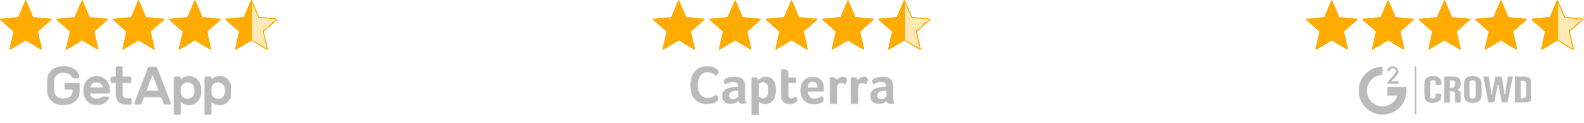 Review site ratings 4.5 stars